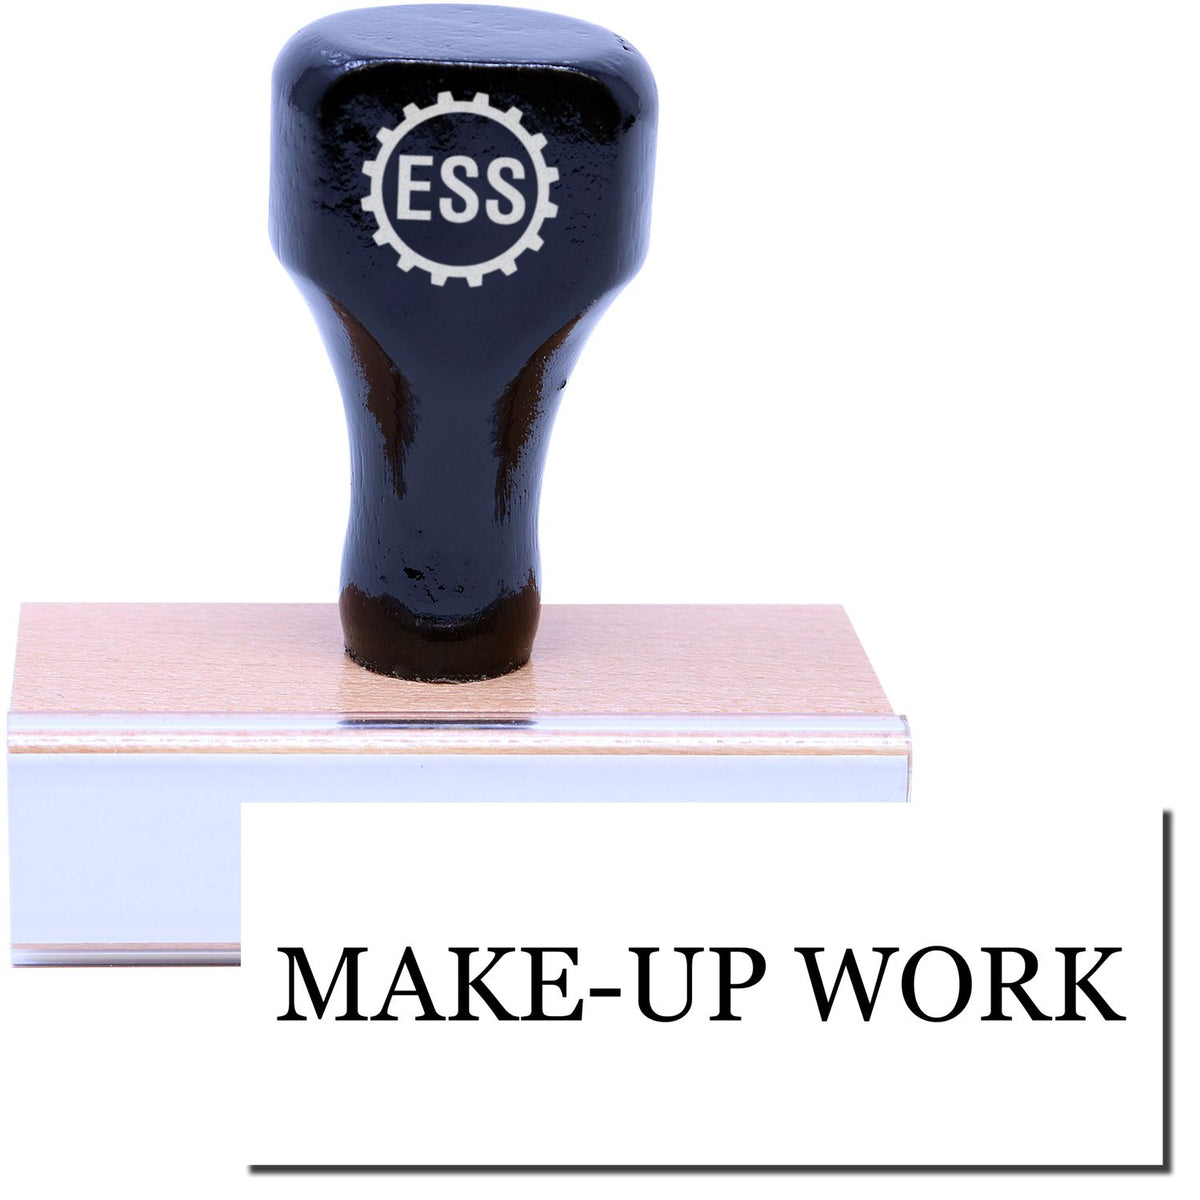 A stock office rubber stamp with a stamped image showing how the text &quot;MAKE-UP WORK&quot; is displayed after stamping.